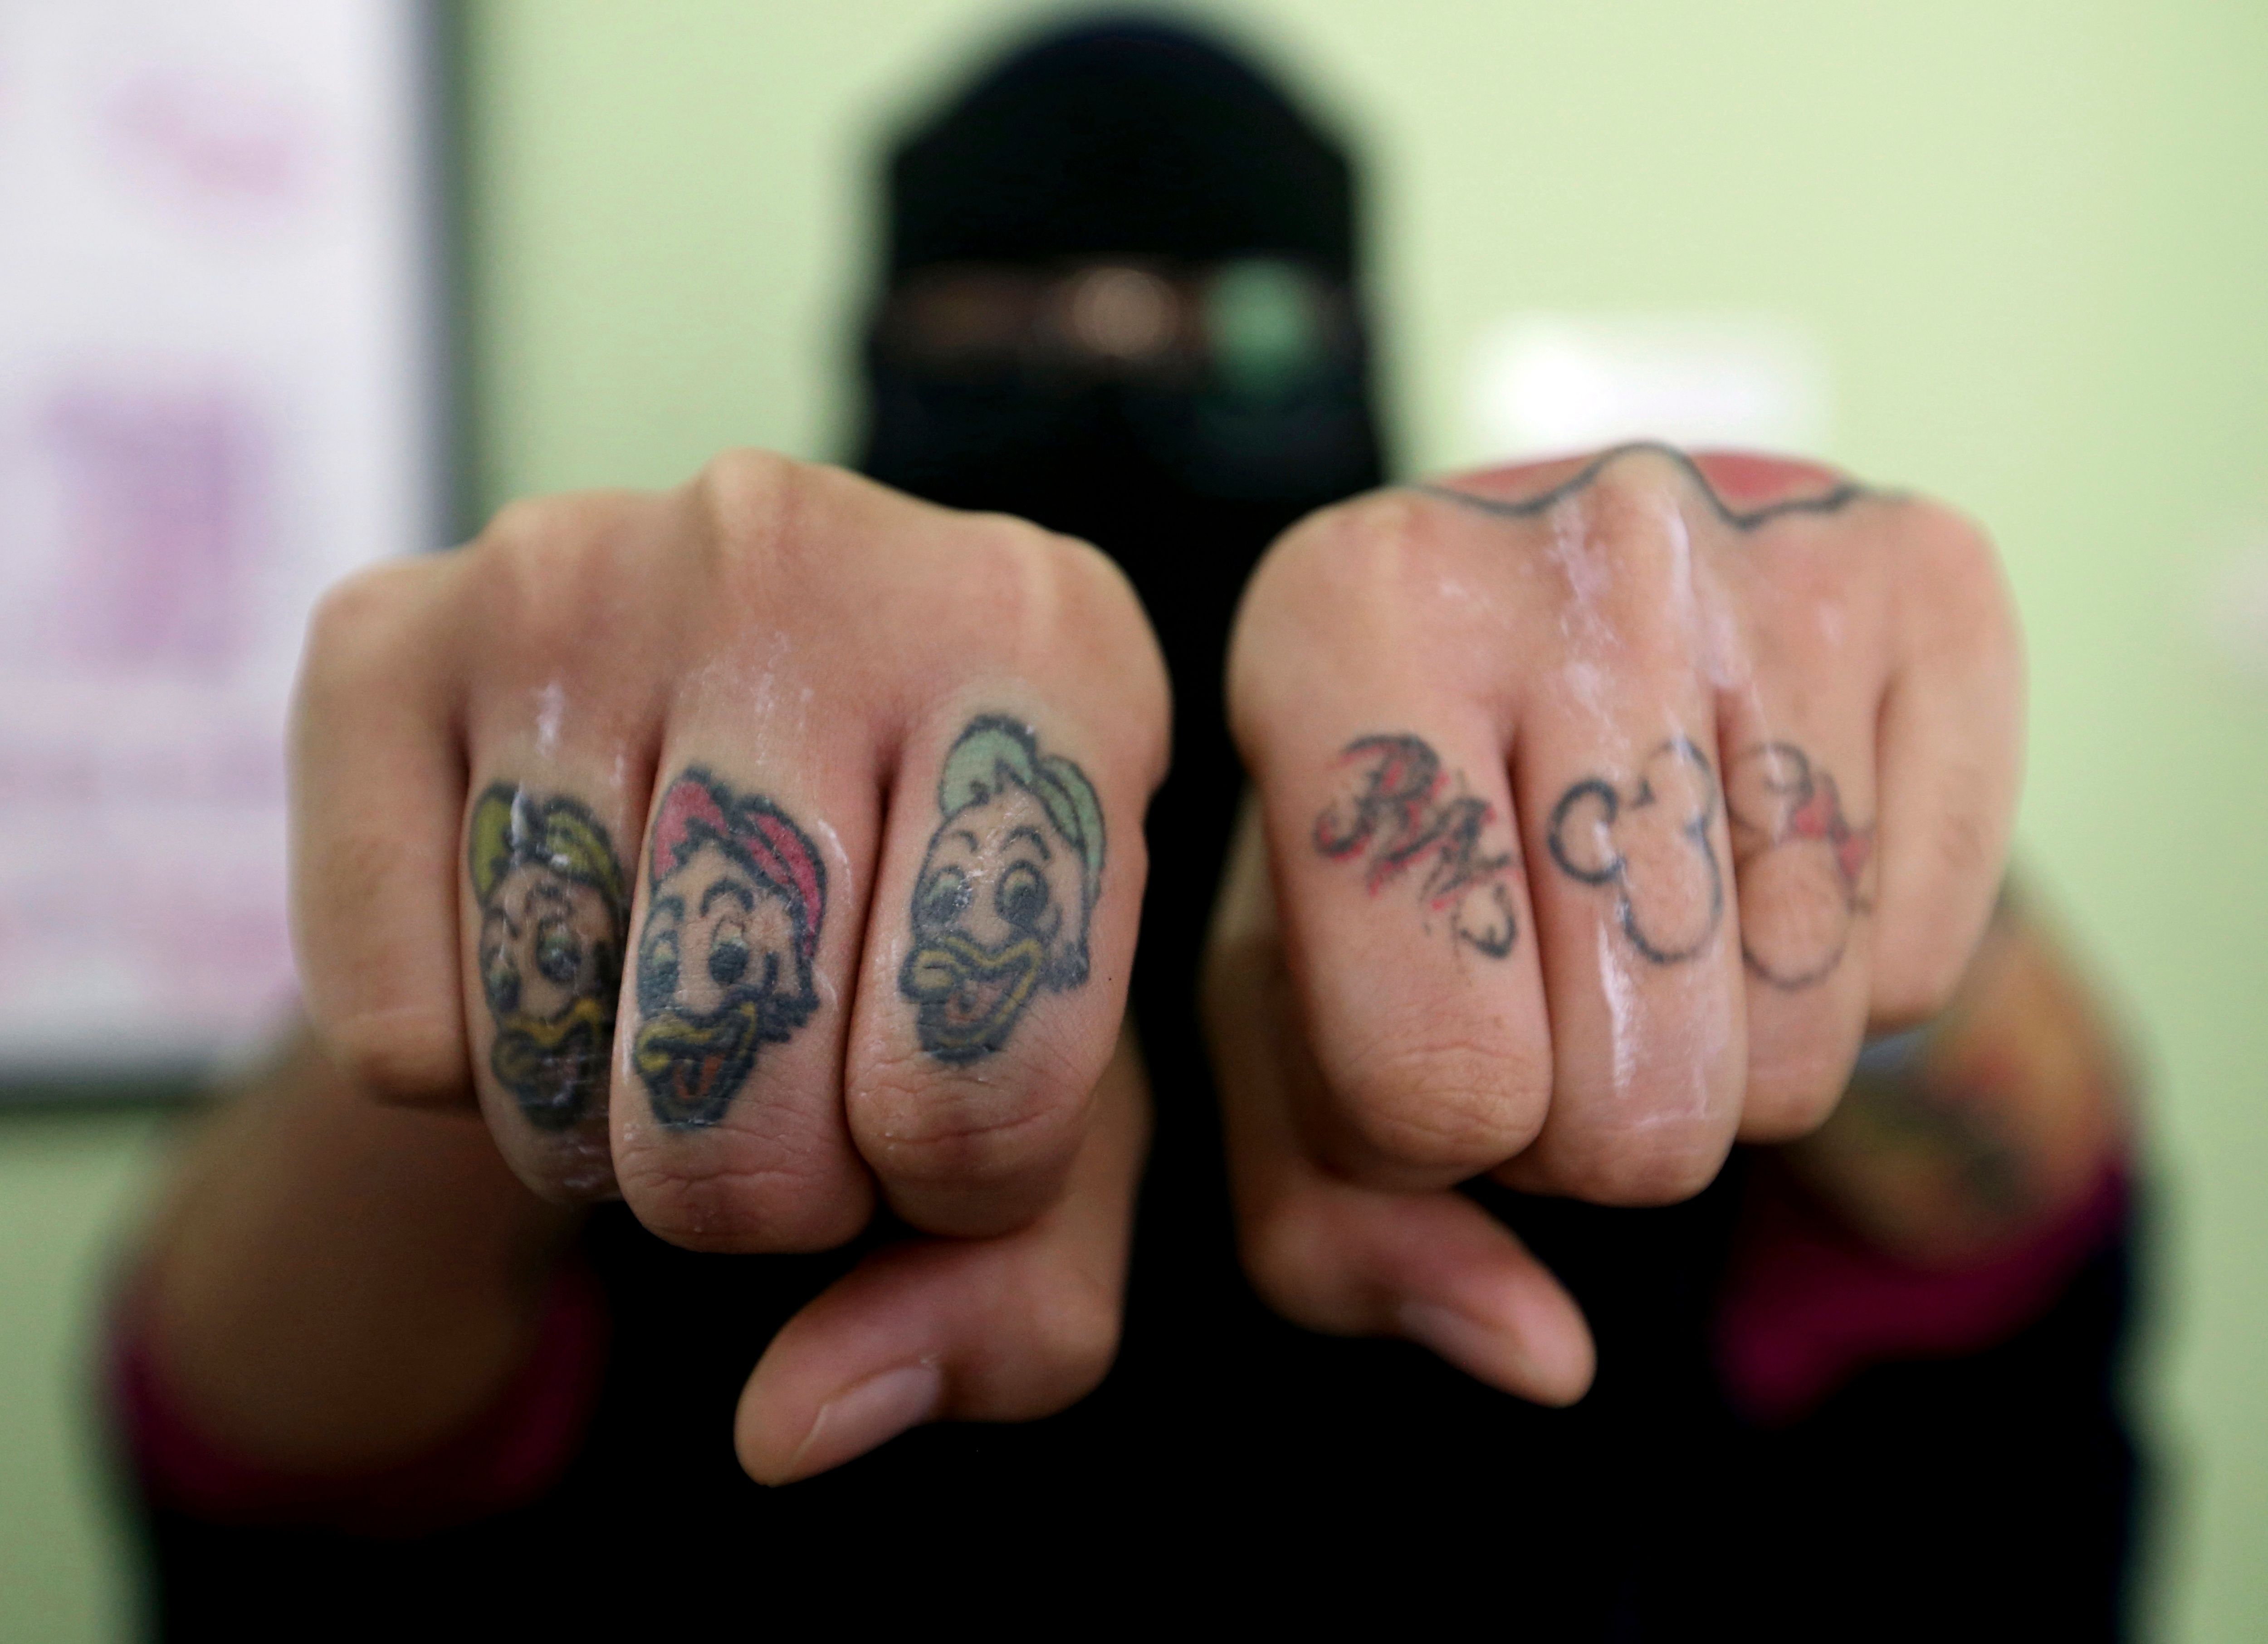 Punk Muslims erase tattoos (and sin) in conservative Indonesia - ABC News